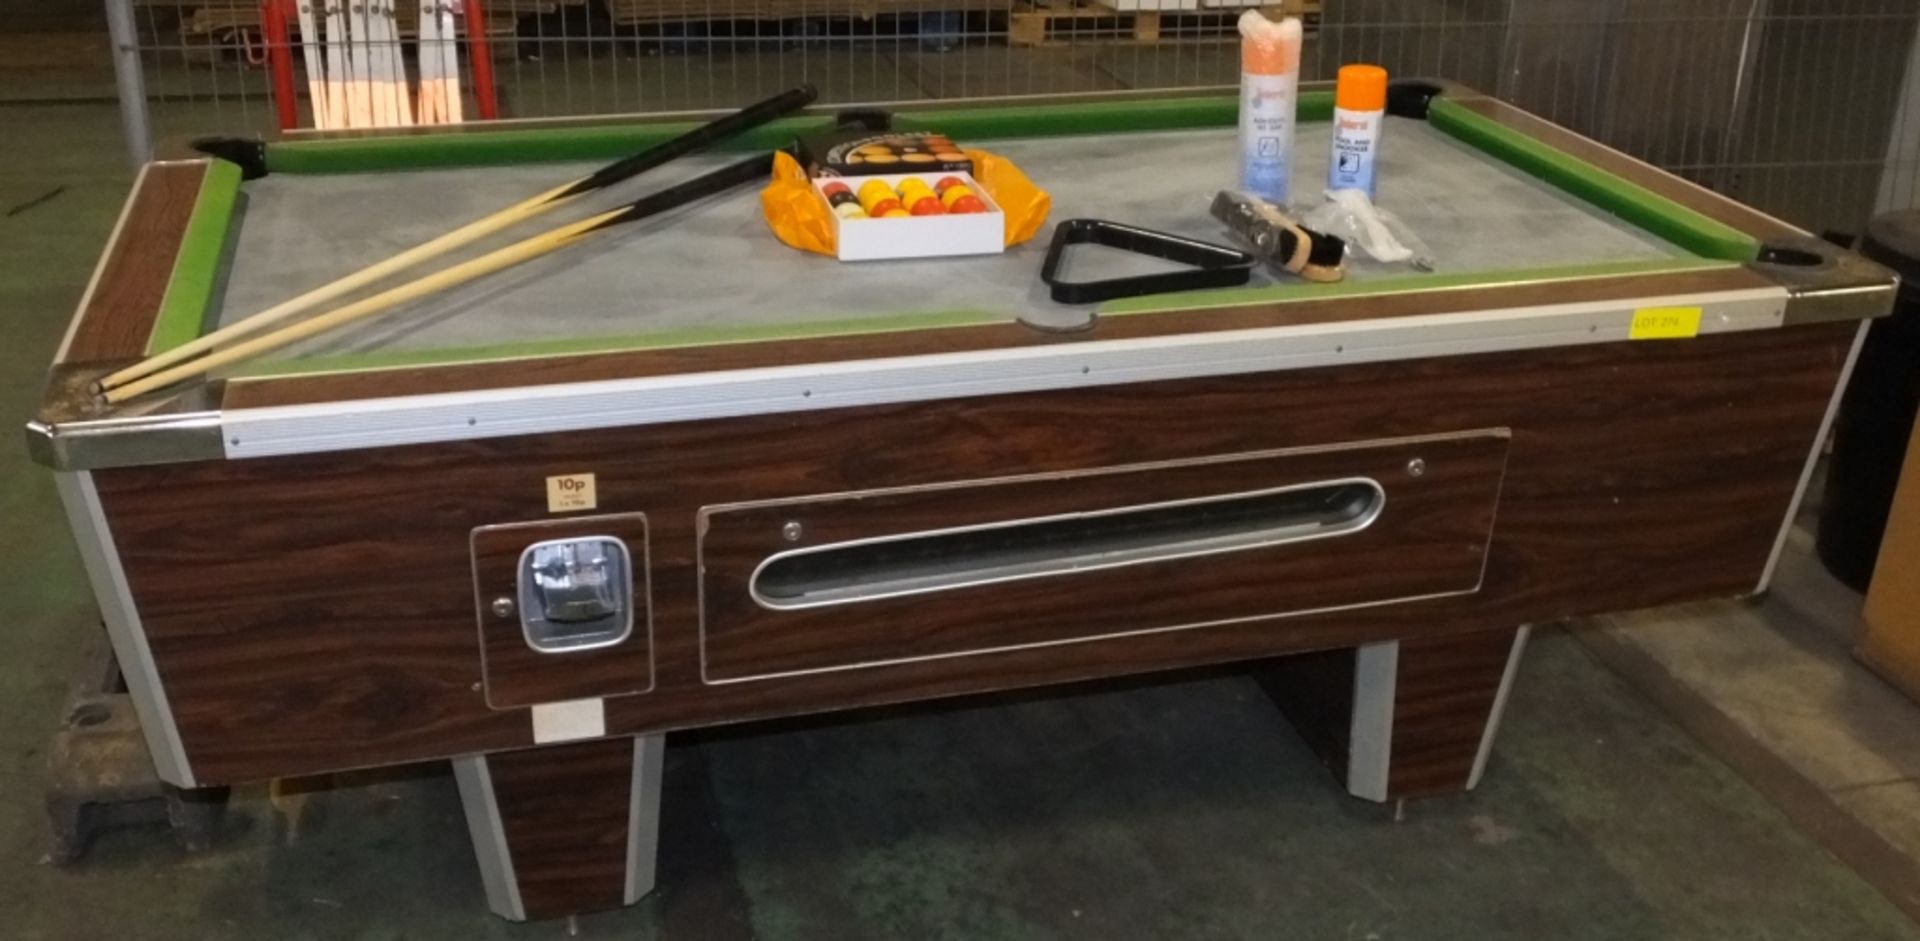 Coin Operated Pool Table - Cues, Balls, Brushes (need reclothing)